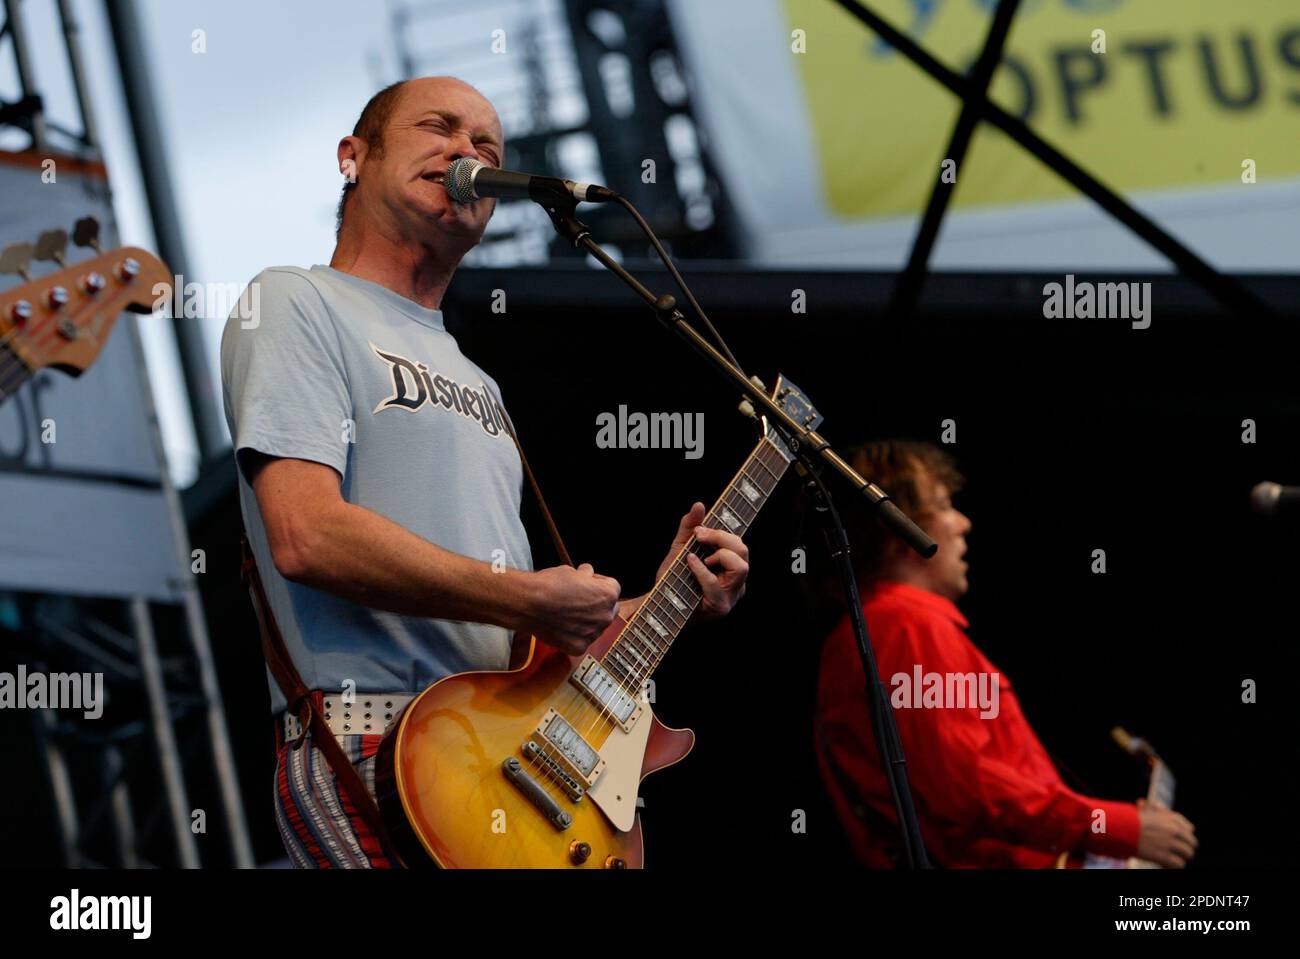 Dave Faulkner of the Hoodoo Gurus performing at the Rockin' 4 Rights concert at Sydney Cricket Ground to a 40,000-strong crowd protesting the Liberal (conservative) government’s Industrial Relations policies and changes to workplace laws. A protest march through the streets of Sydney’s city centre preceded the concert. Sydney, Australia. 22.04.07. Stock Photo